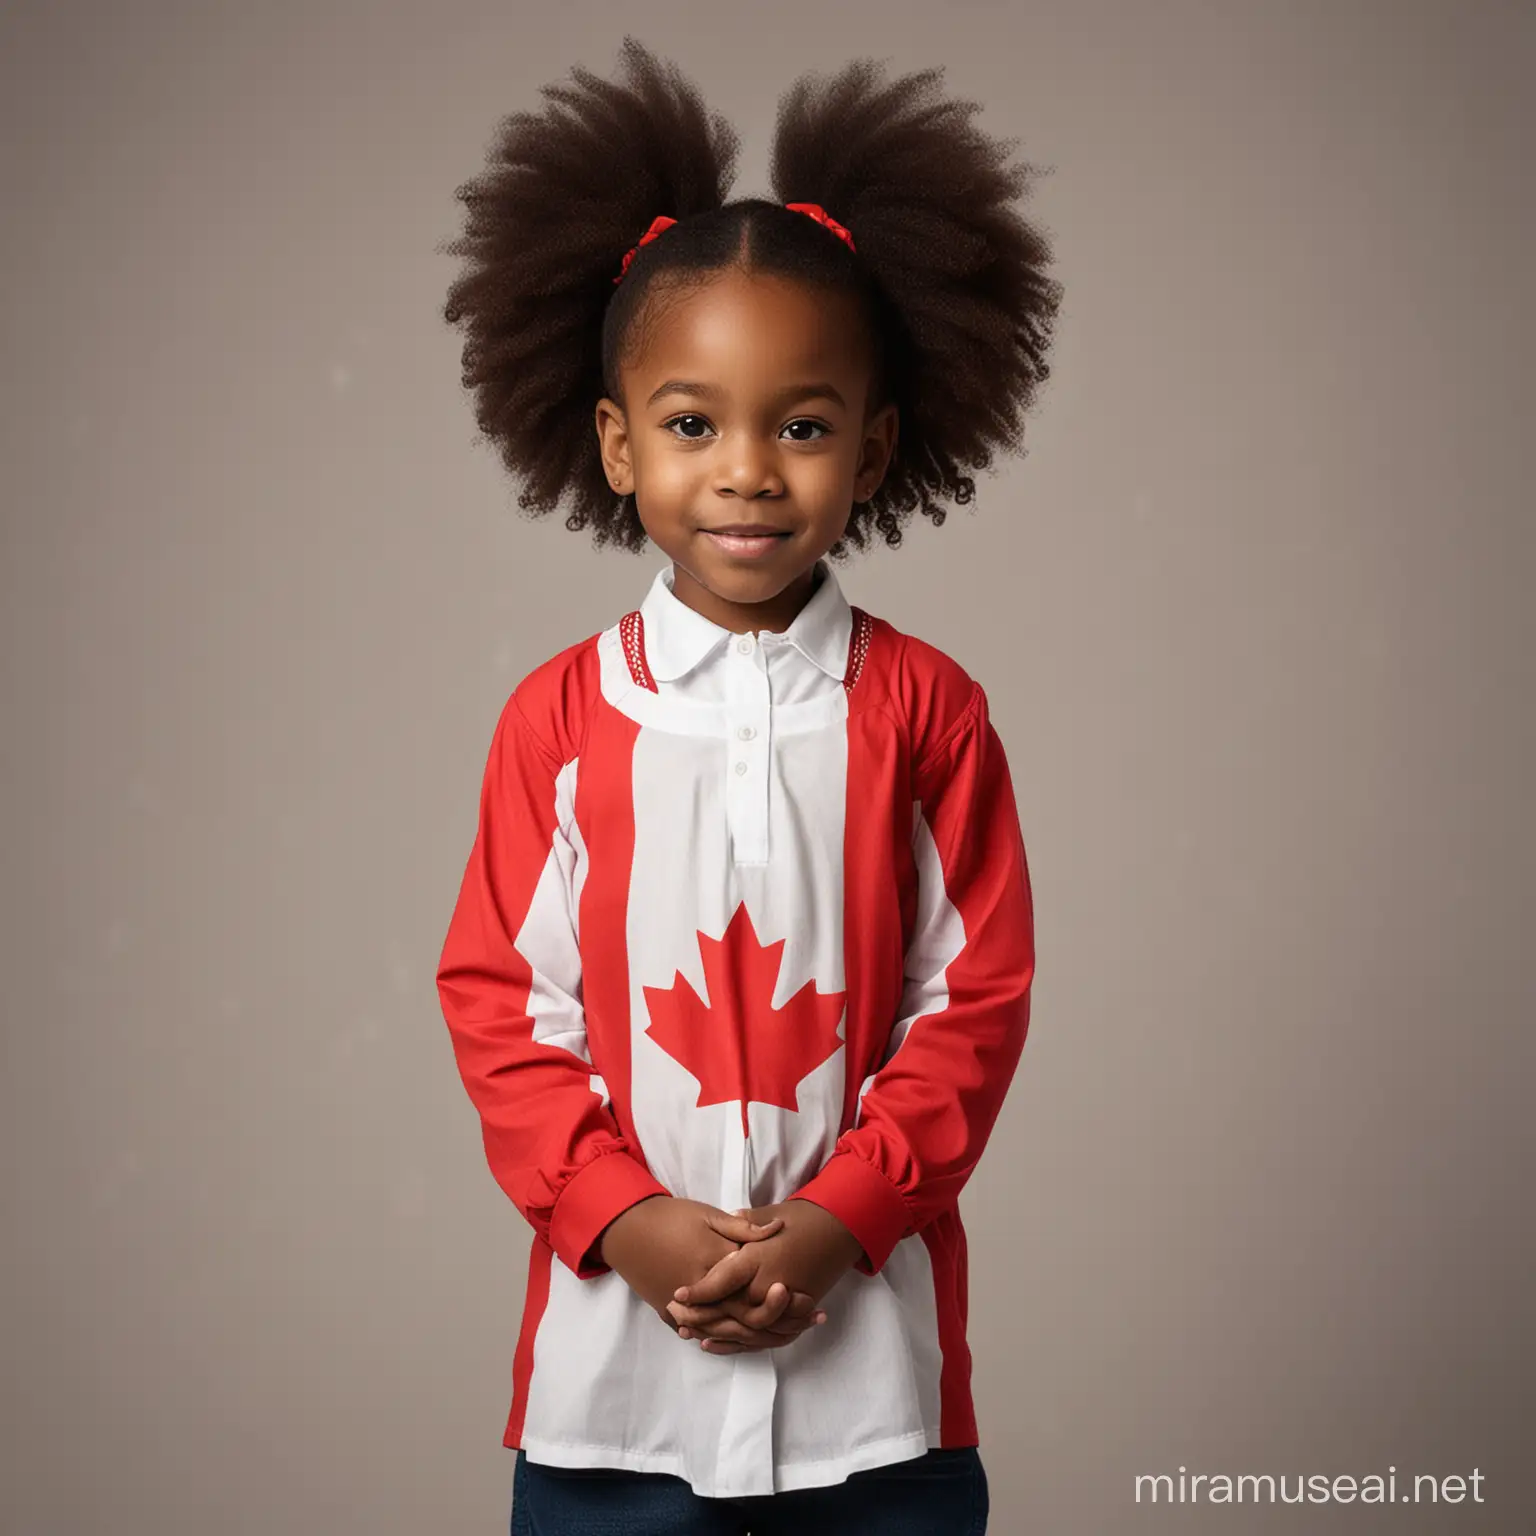 little African girl student ,with Canada  flag